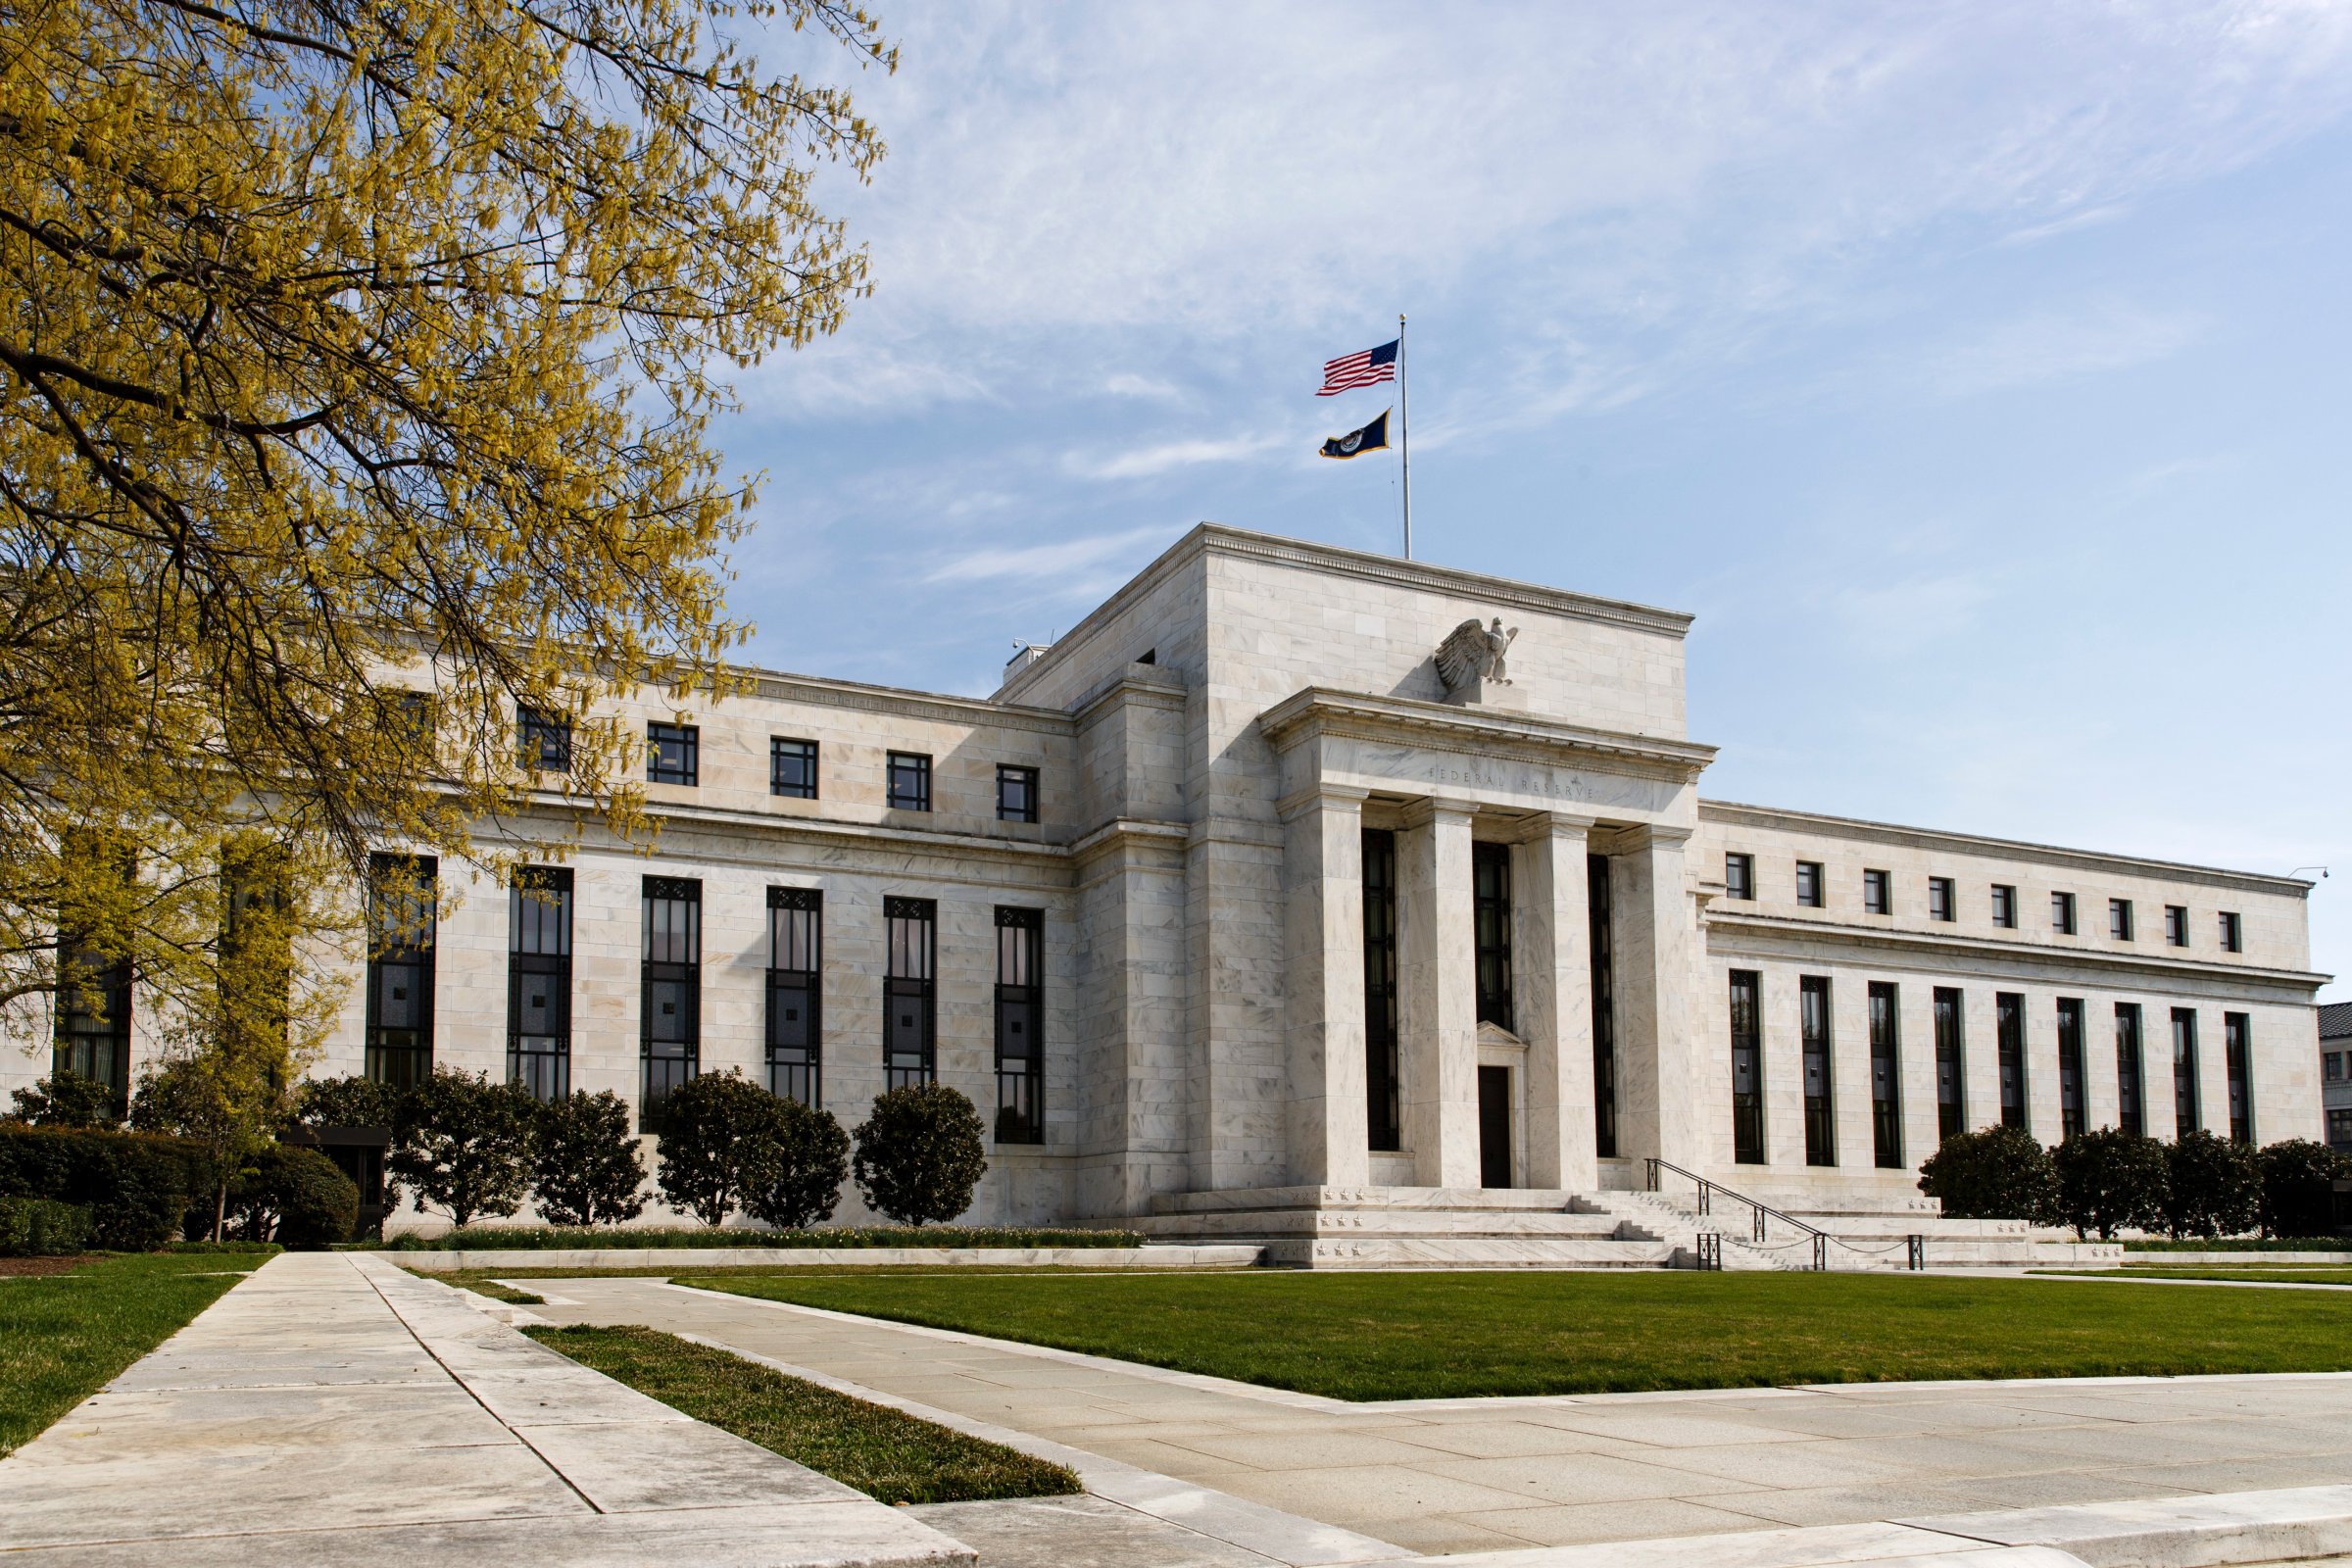 The U.S. Federal Reserve Bank Building in Washington.